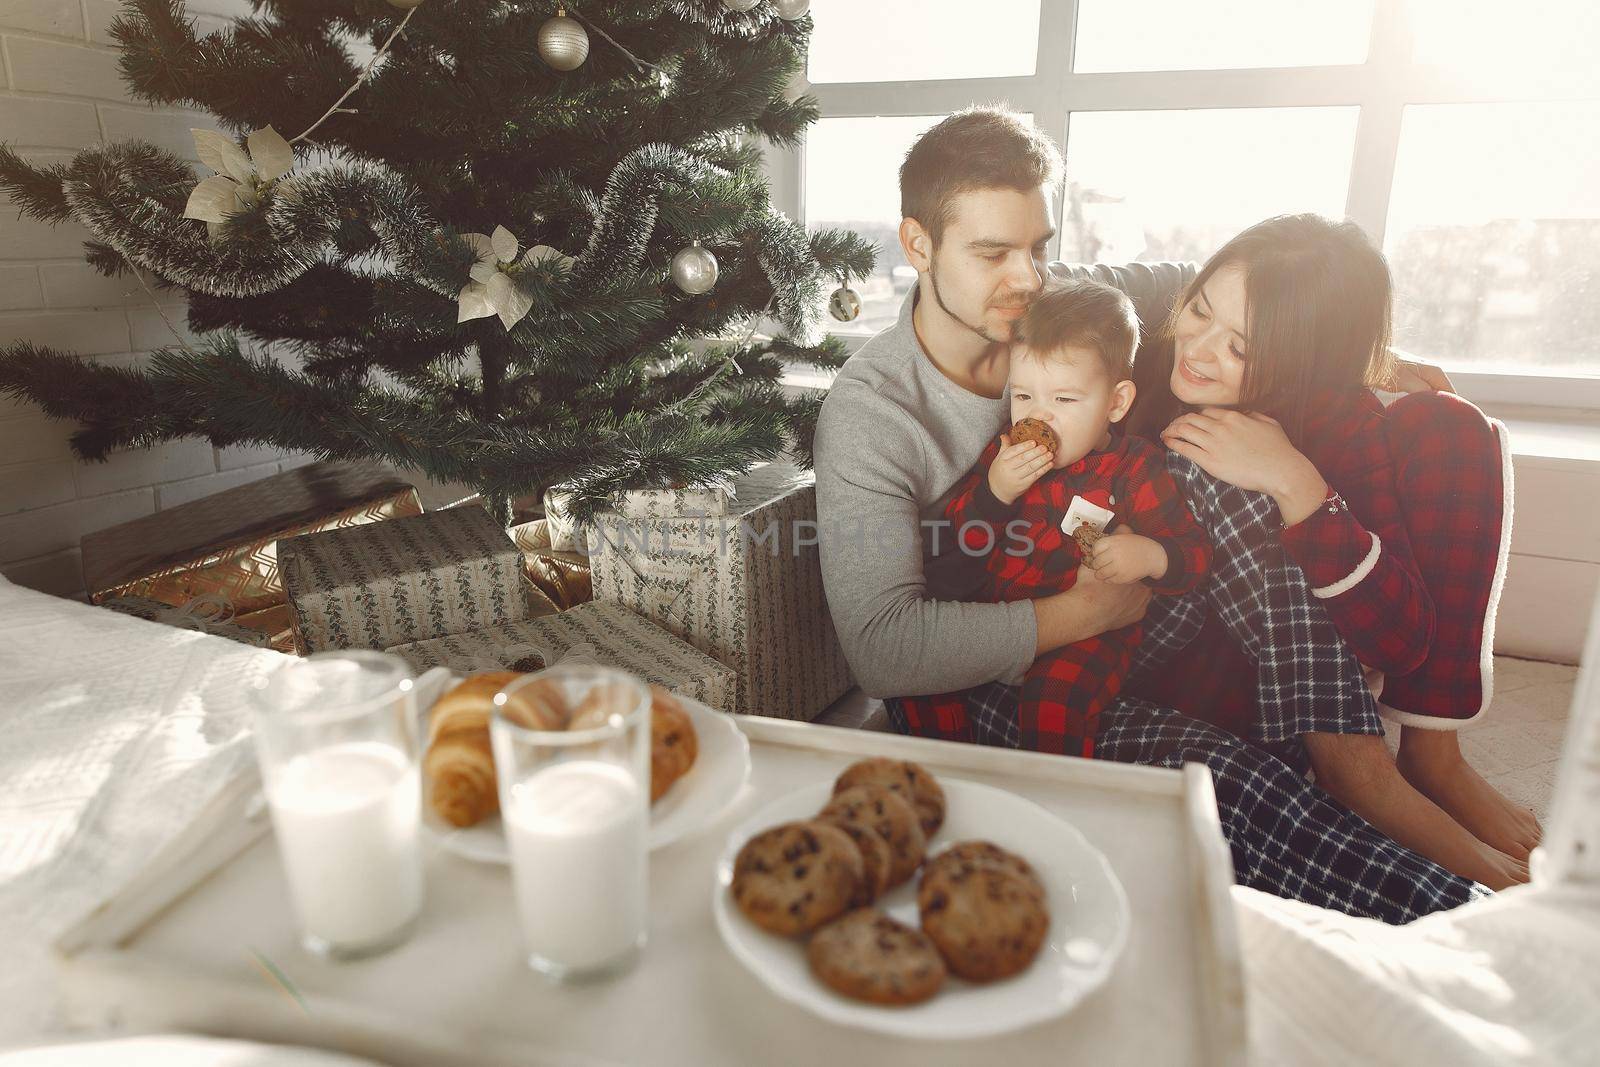 Beautiful family sitting on bed hugging and eating cookies by prostooleh